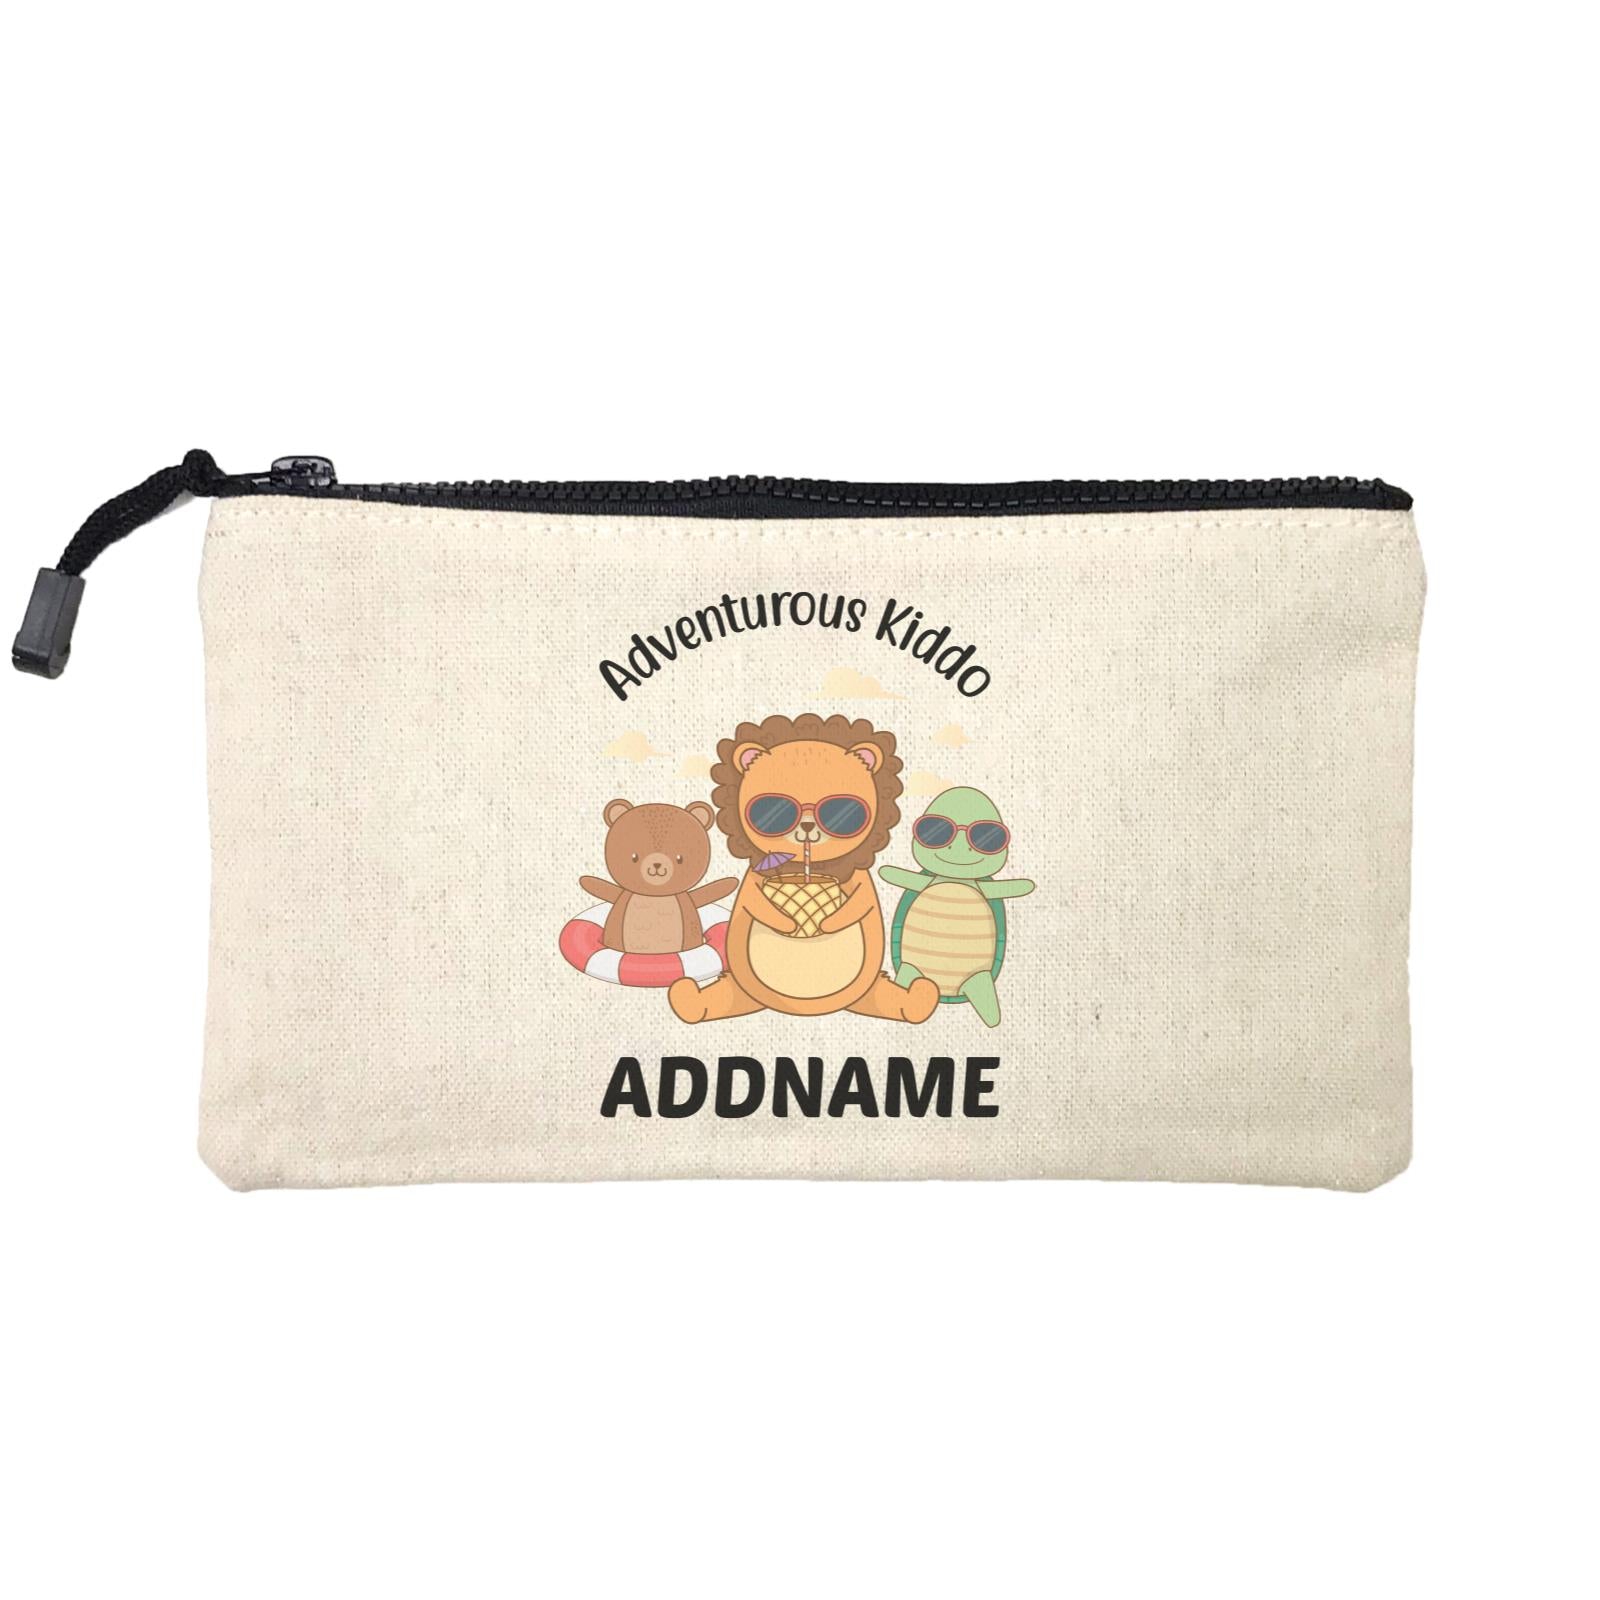 Adventurous Kiddo Addname SP Stationery Pouch